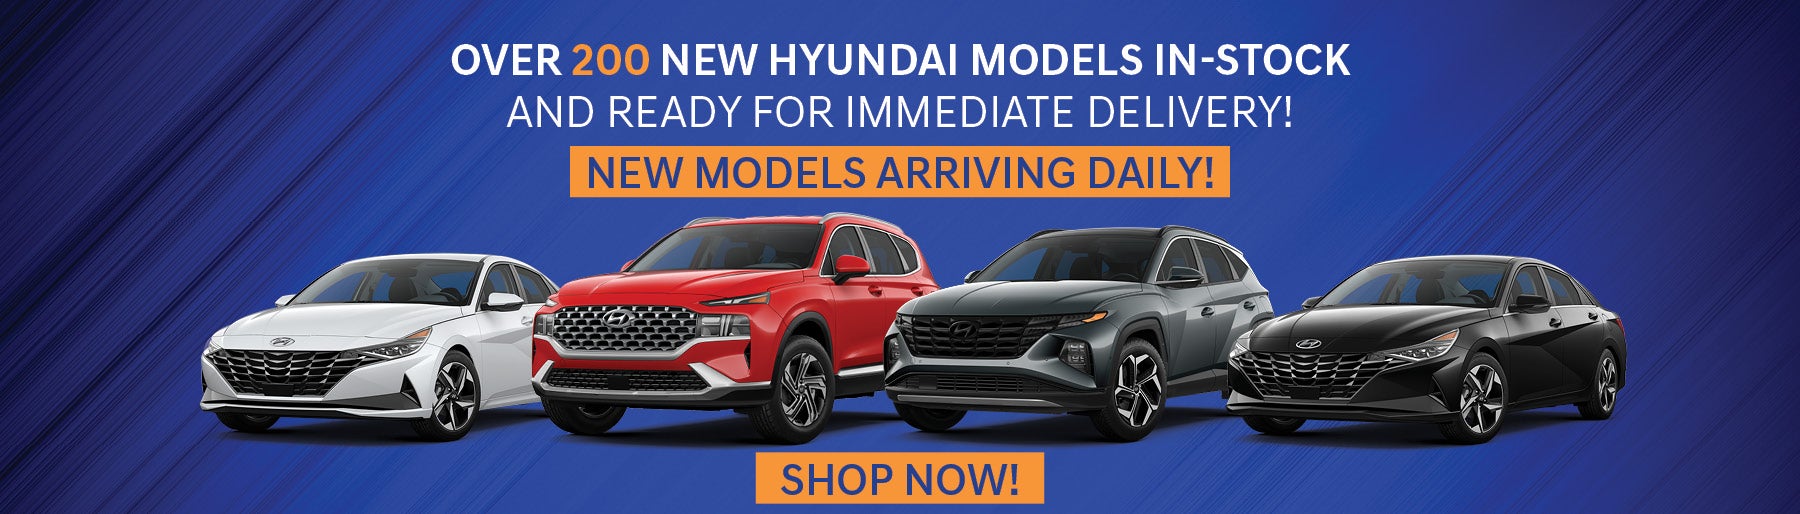 Over 200 New Models in Stock